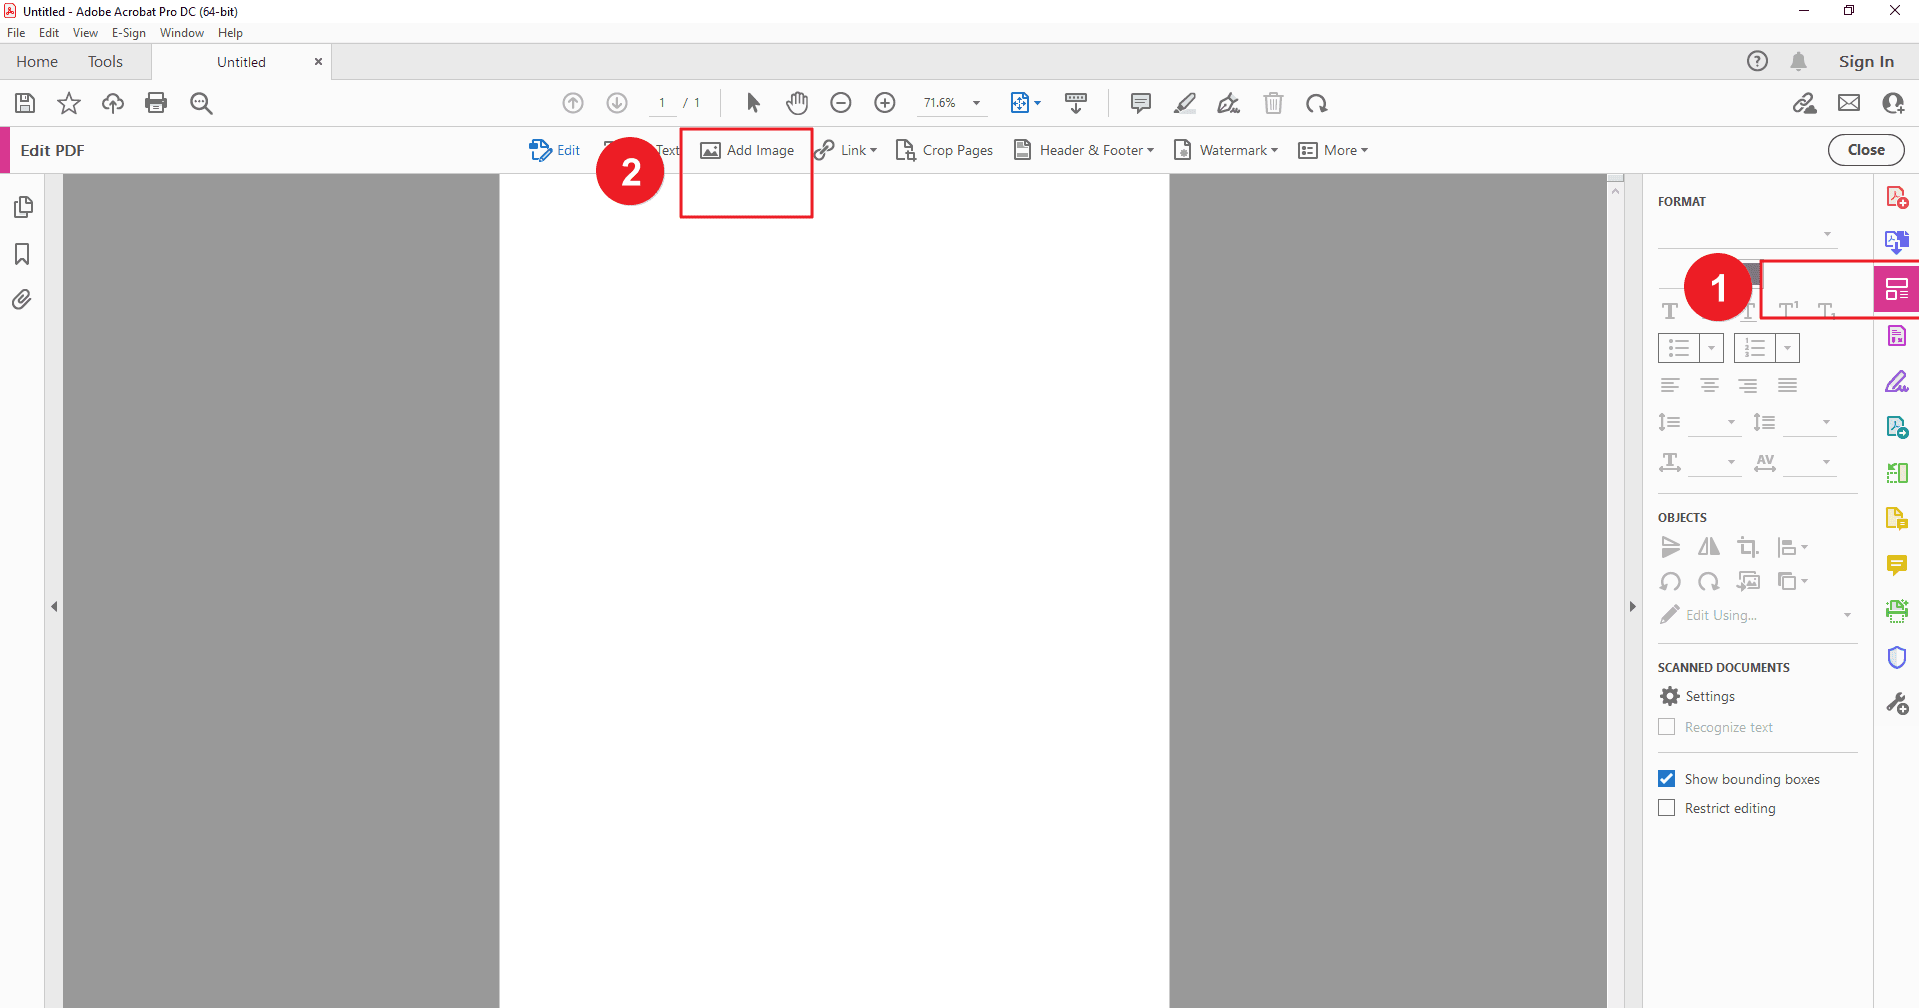 Step 1 With a new document open in Adobe Acrobat